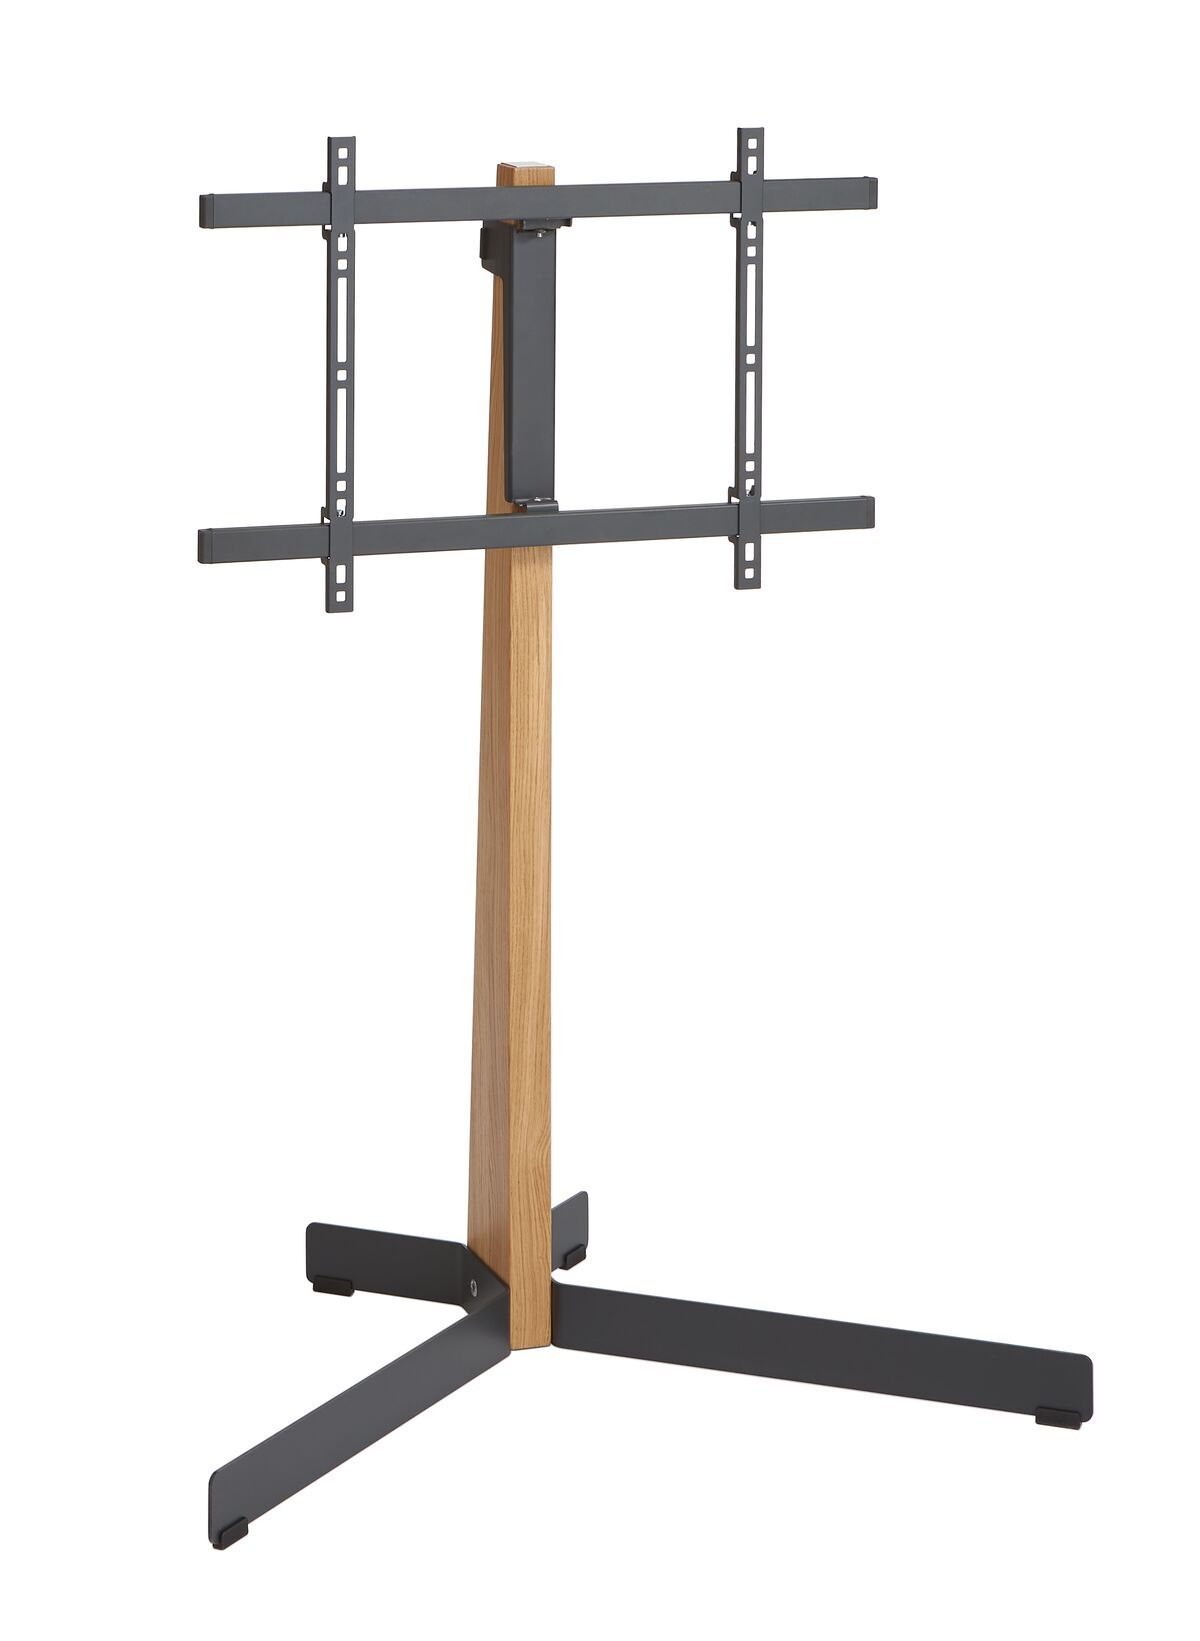 Vogel's TVS 3695 TV Floor Stand (black) - Suitable for 40 up to 77 inch TVs up to 50 kg - Product